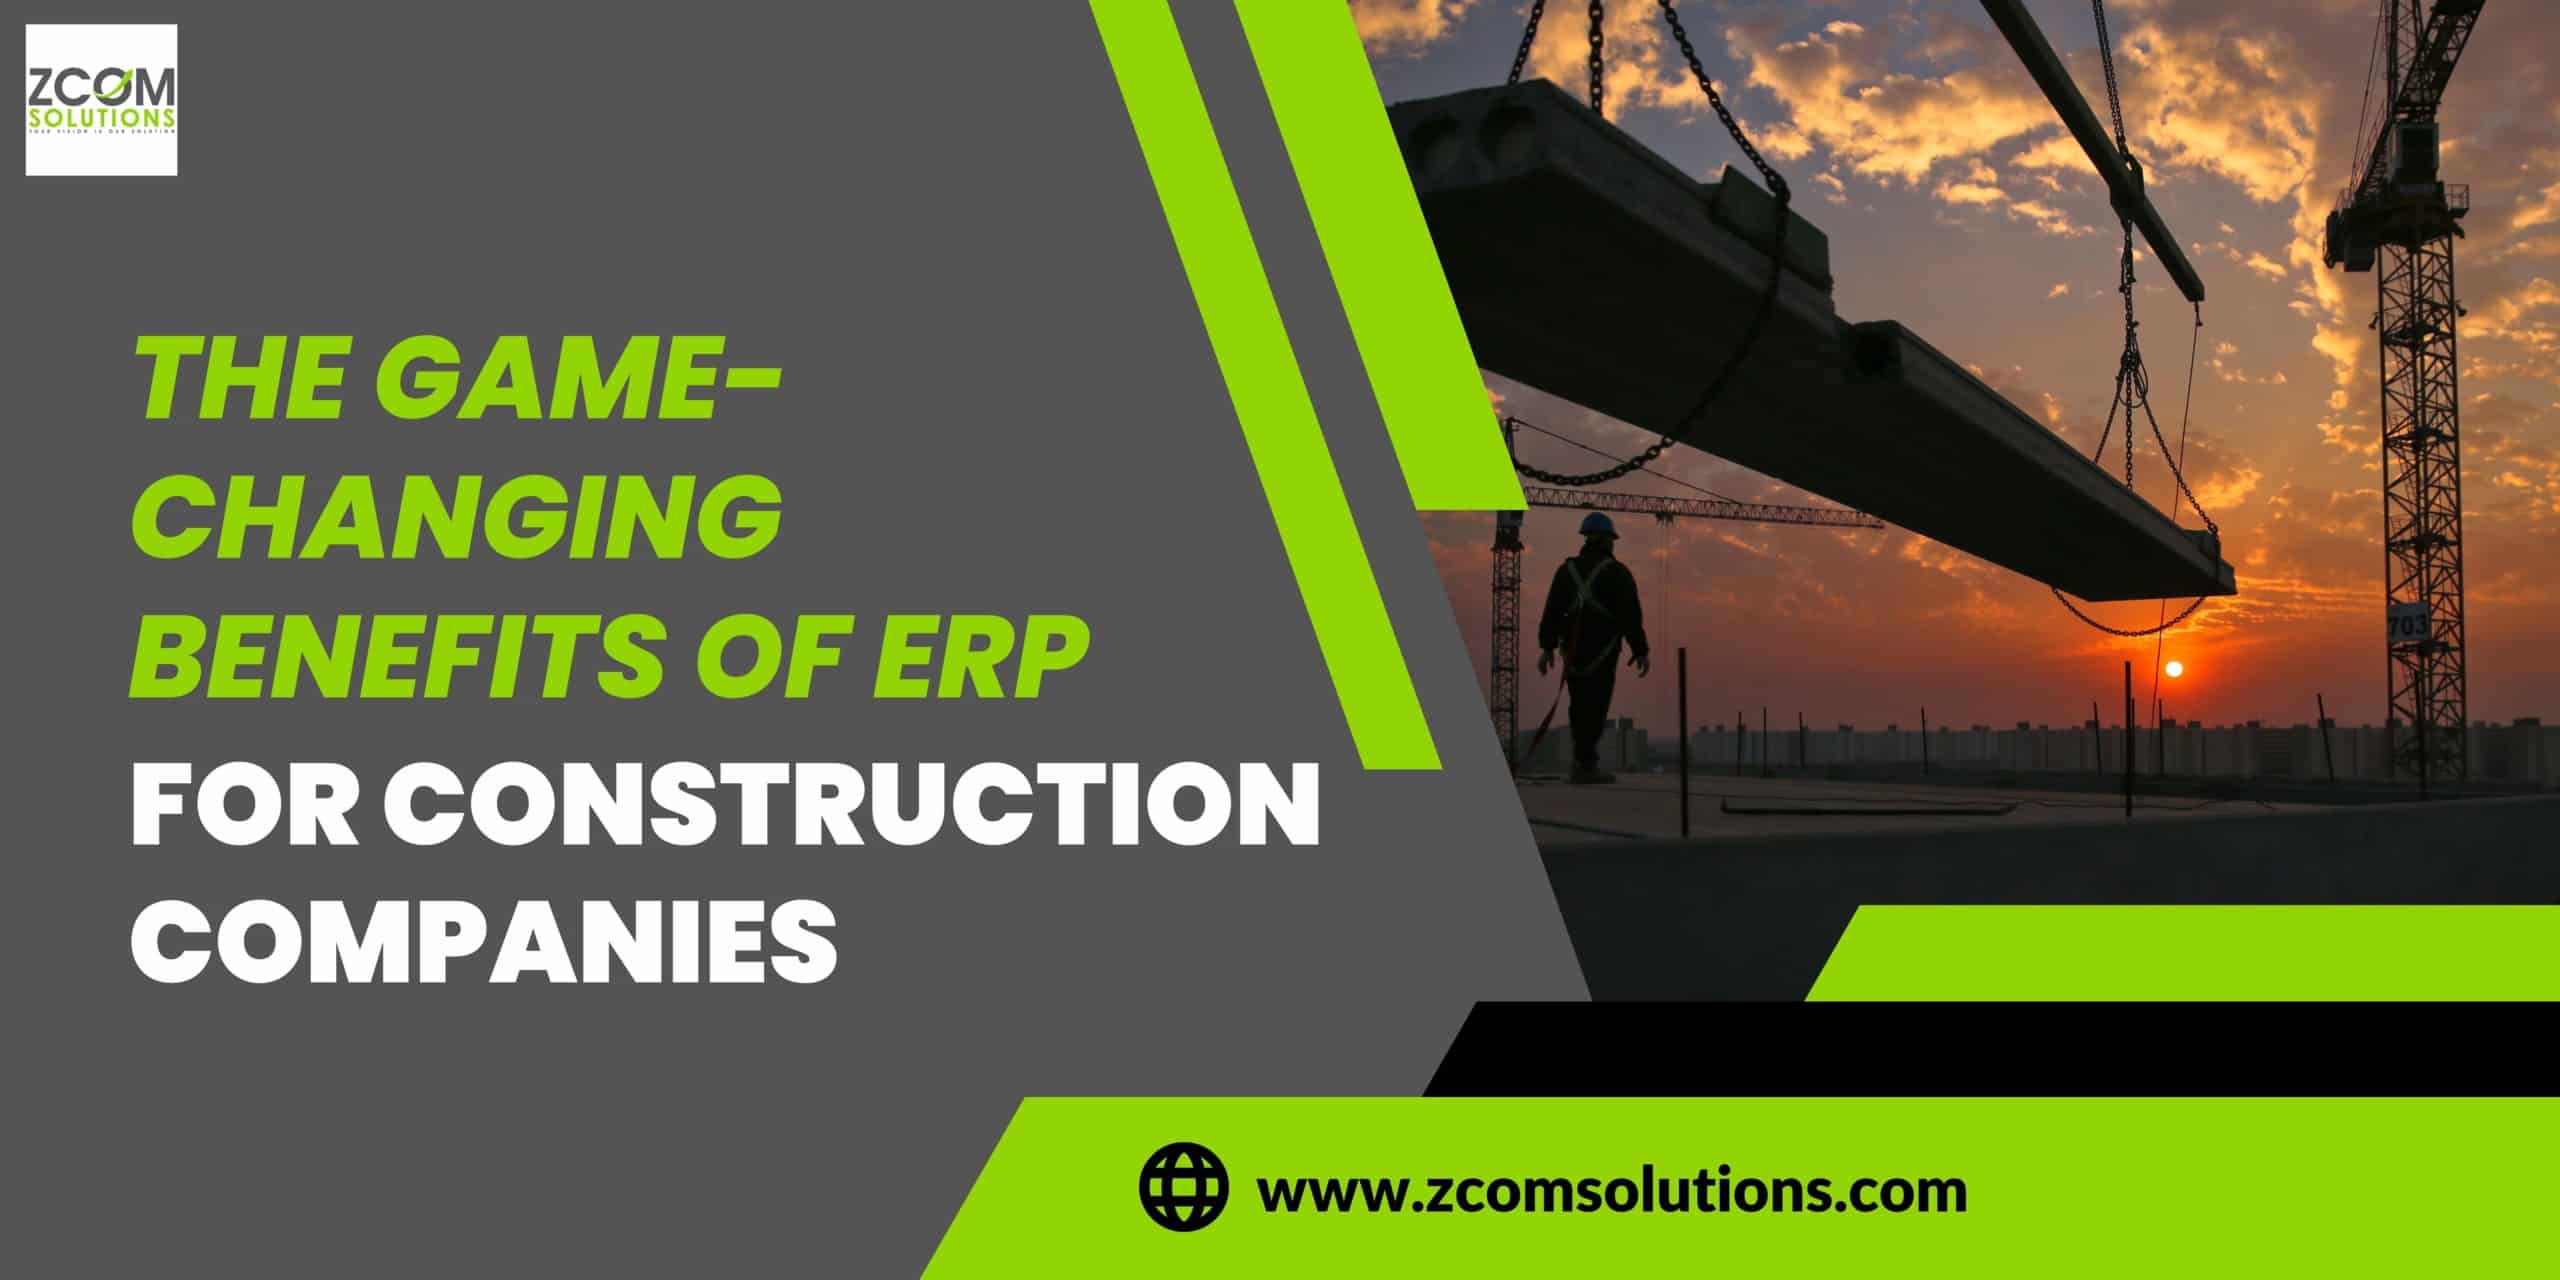 THE GAME-CHANGING BENEFITS OF ERP FOR CONSTRUCTION COMPANIES